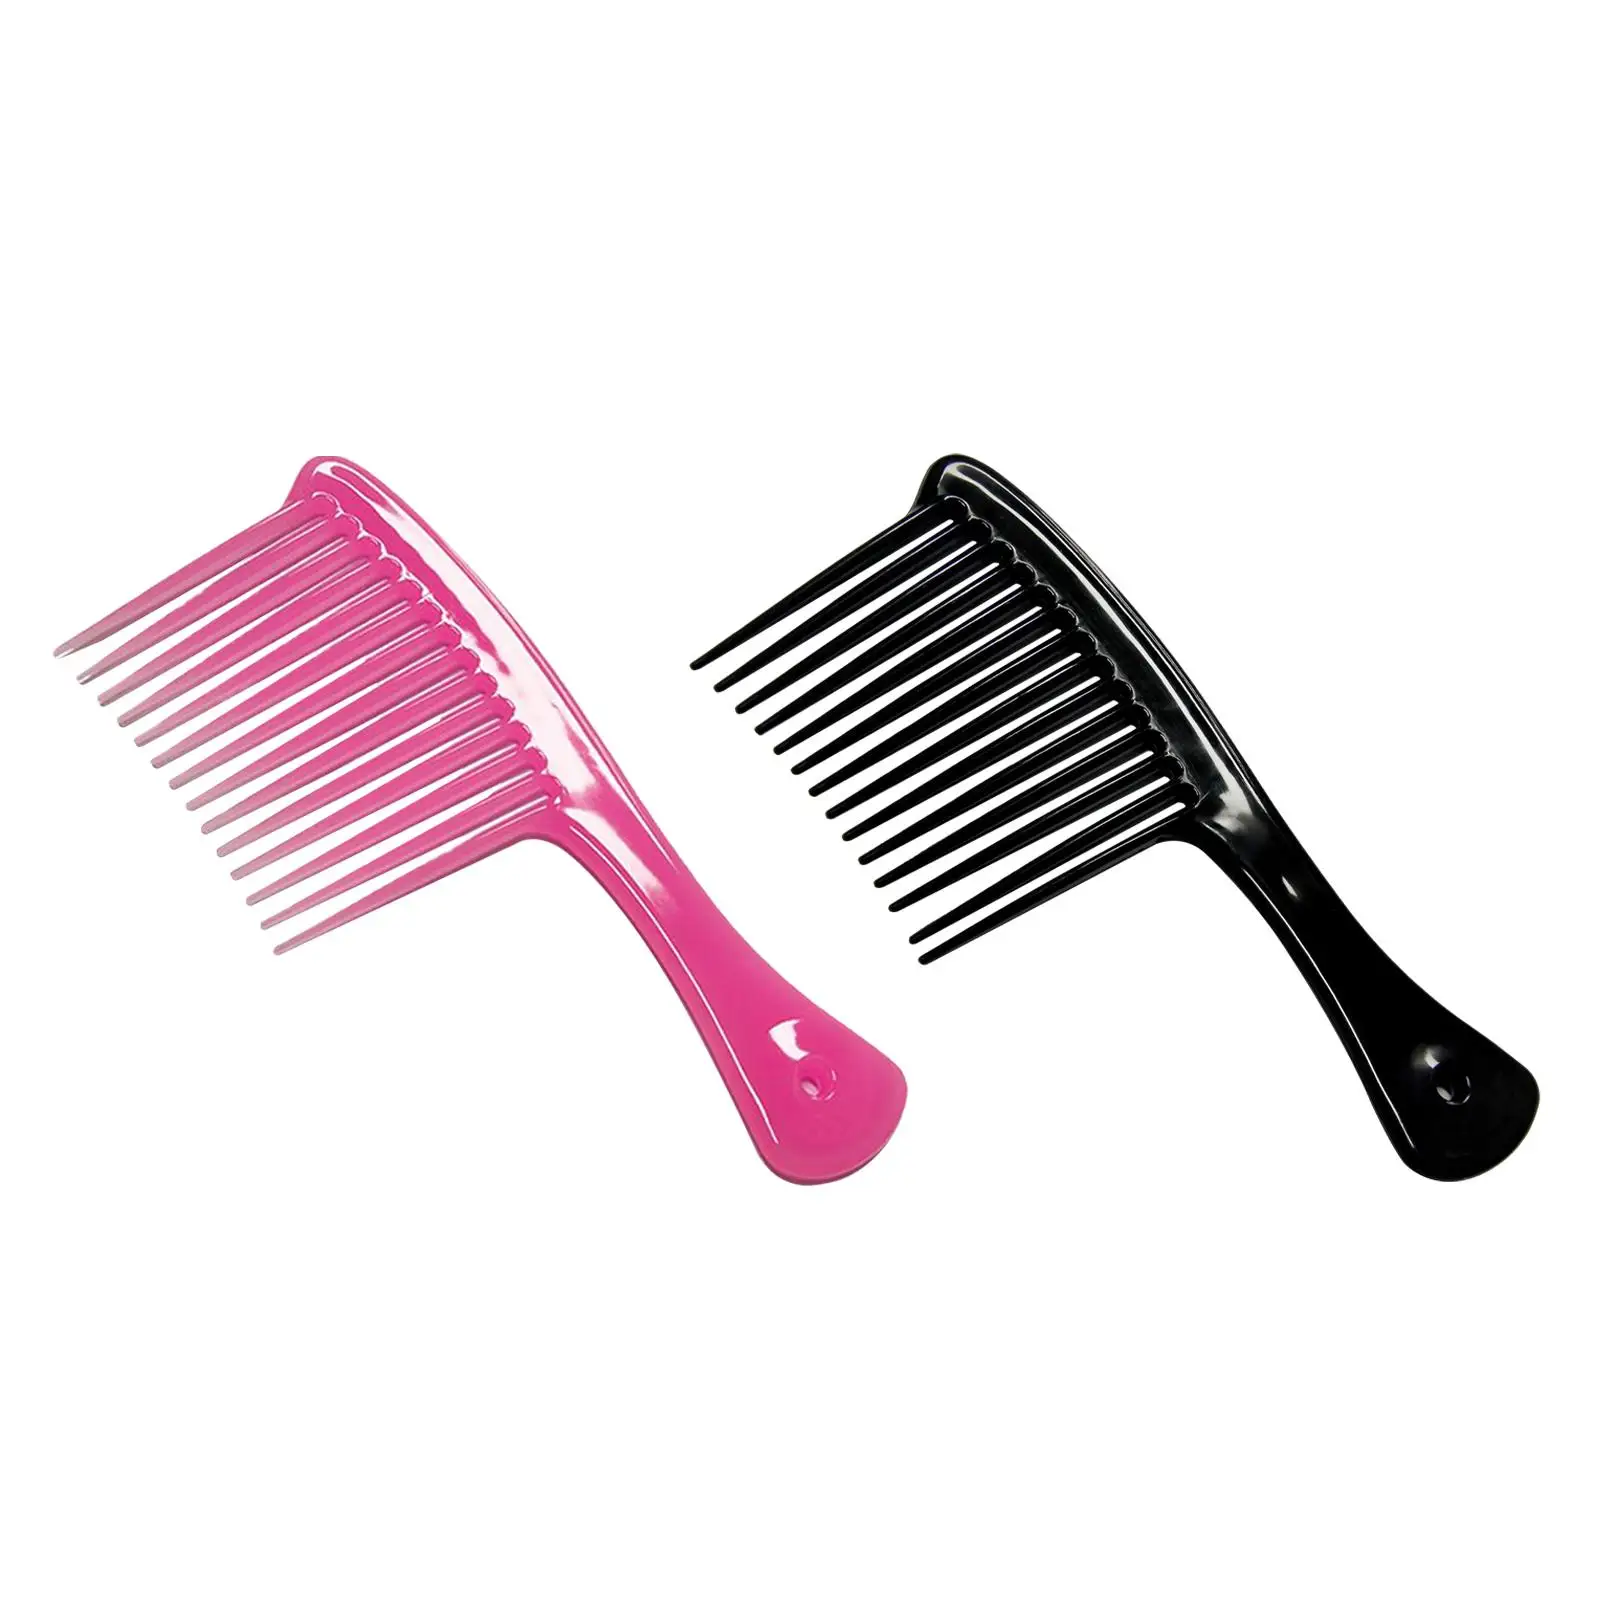 Comb Durable Styling Comb Large Handle Portable Lightweight Hair Styling Tool for Thick Long Hair Curly Hair Home Salon